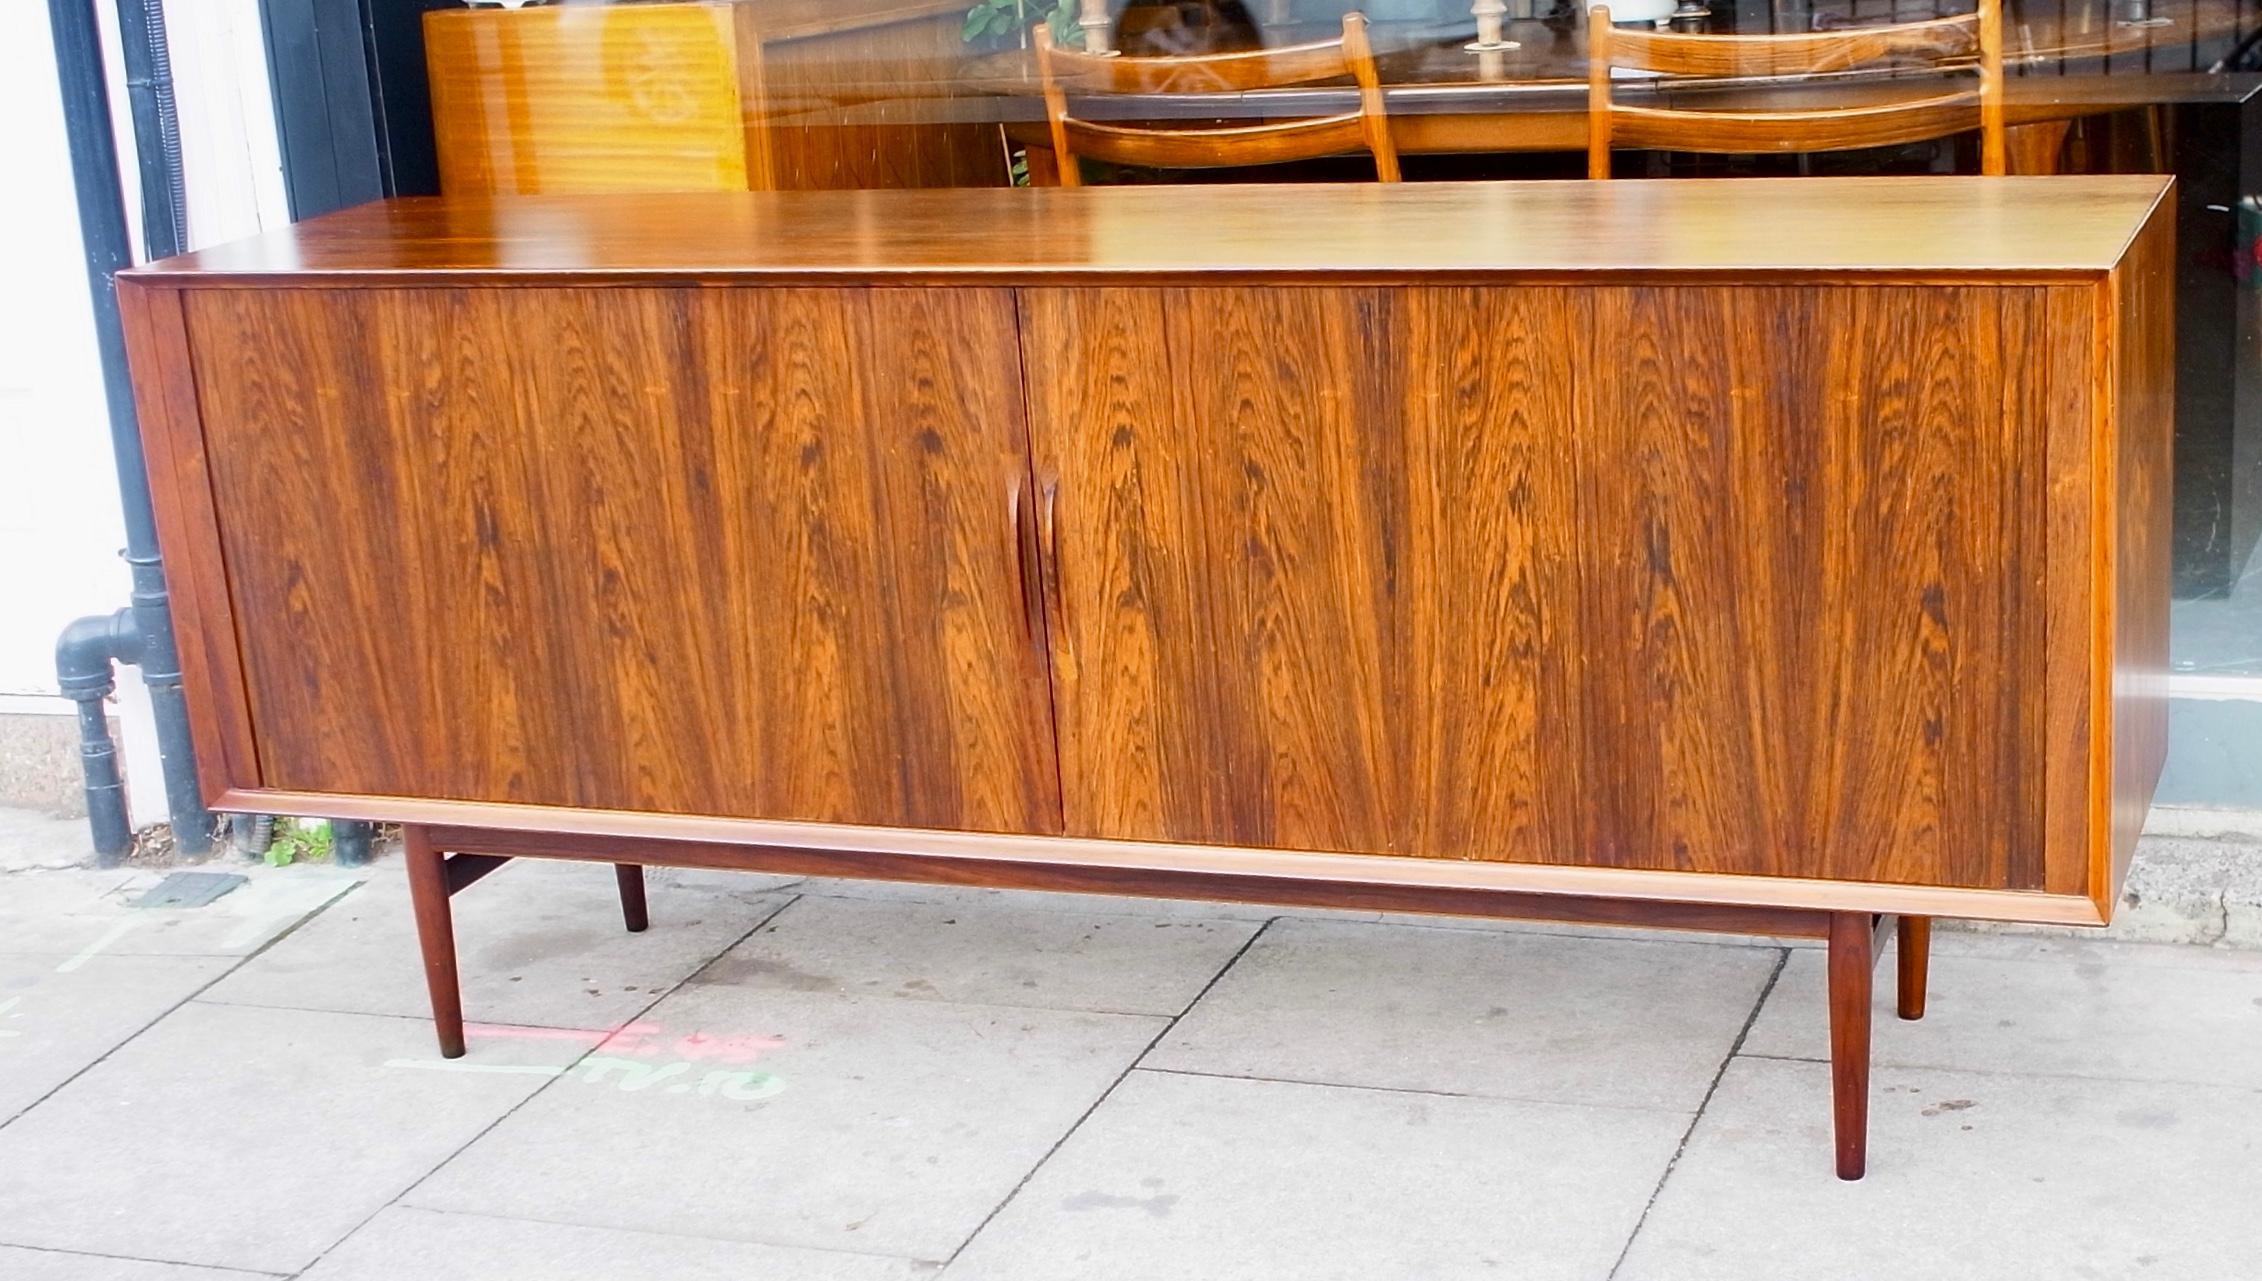 A beautiful example of a Arne Vodder designed rosewood sideboard produced by Sibast. Based on four solid rosewood turned tapered legs, this piece has two tambour fronted doors with delicately carved handles. The sycamore interior, consists of 3x